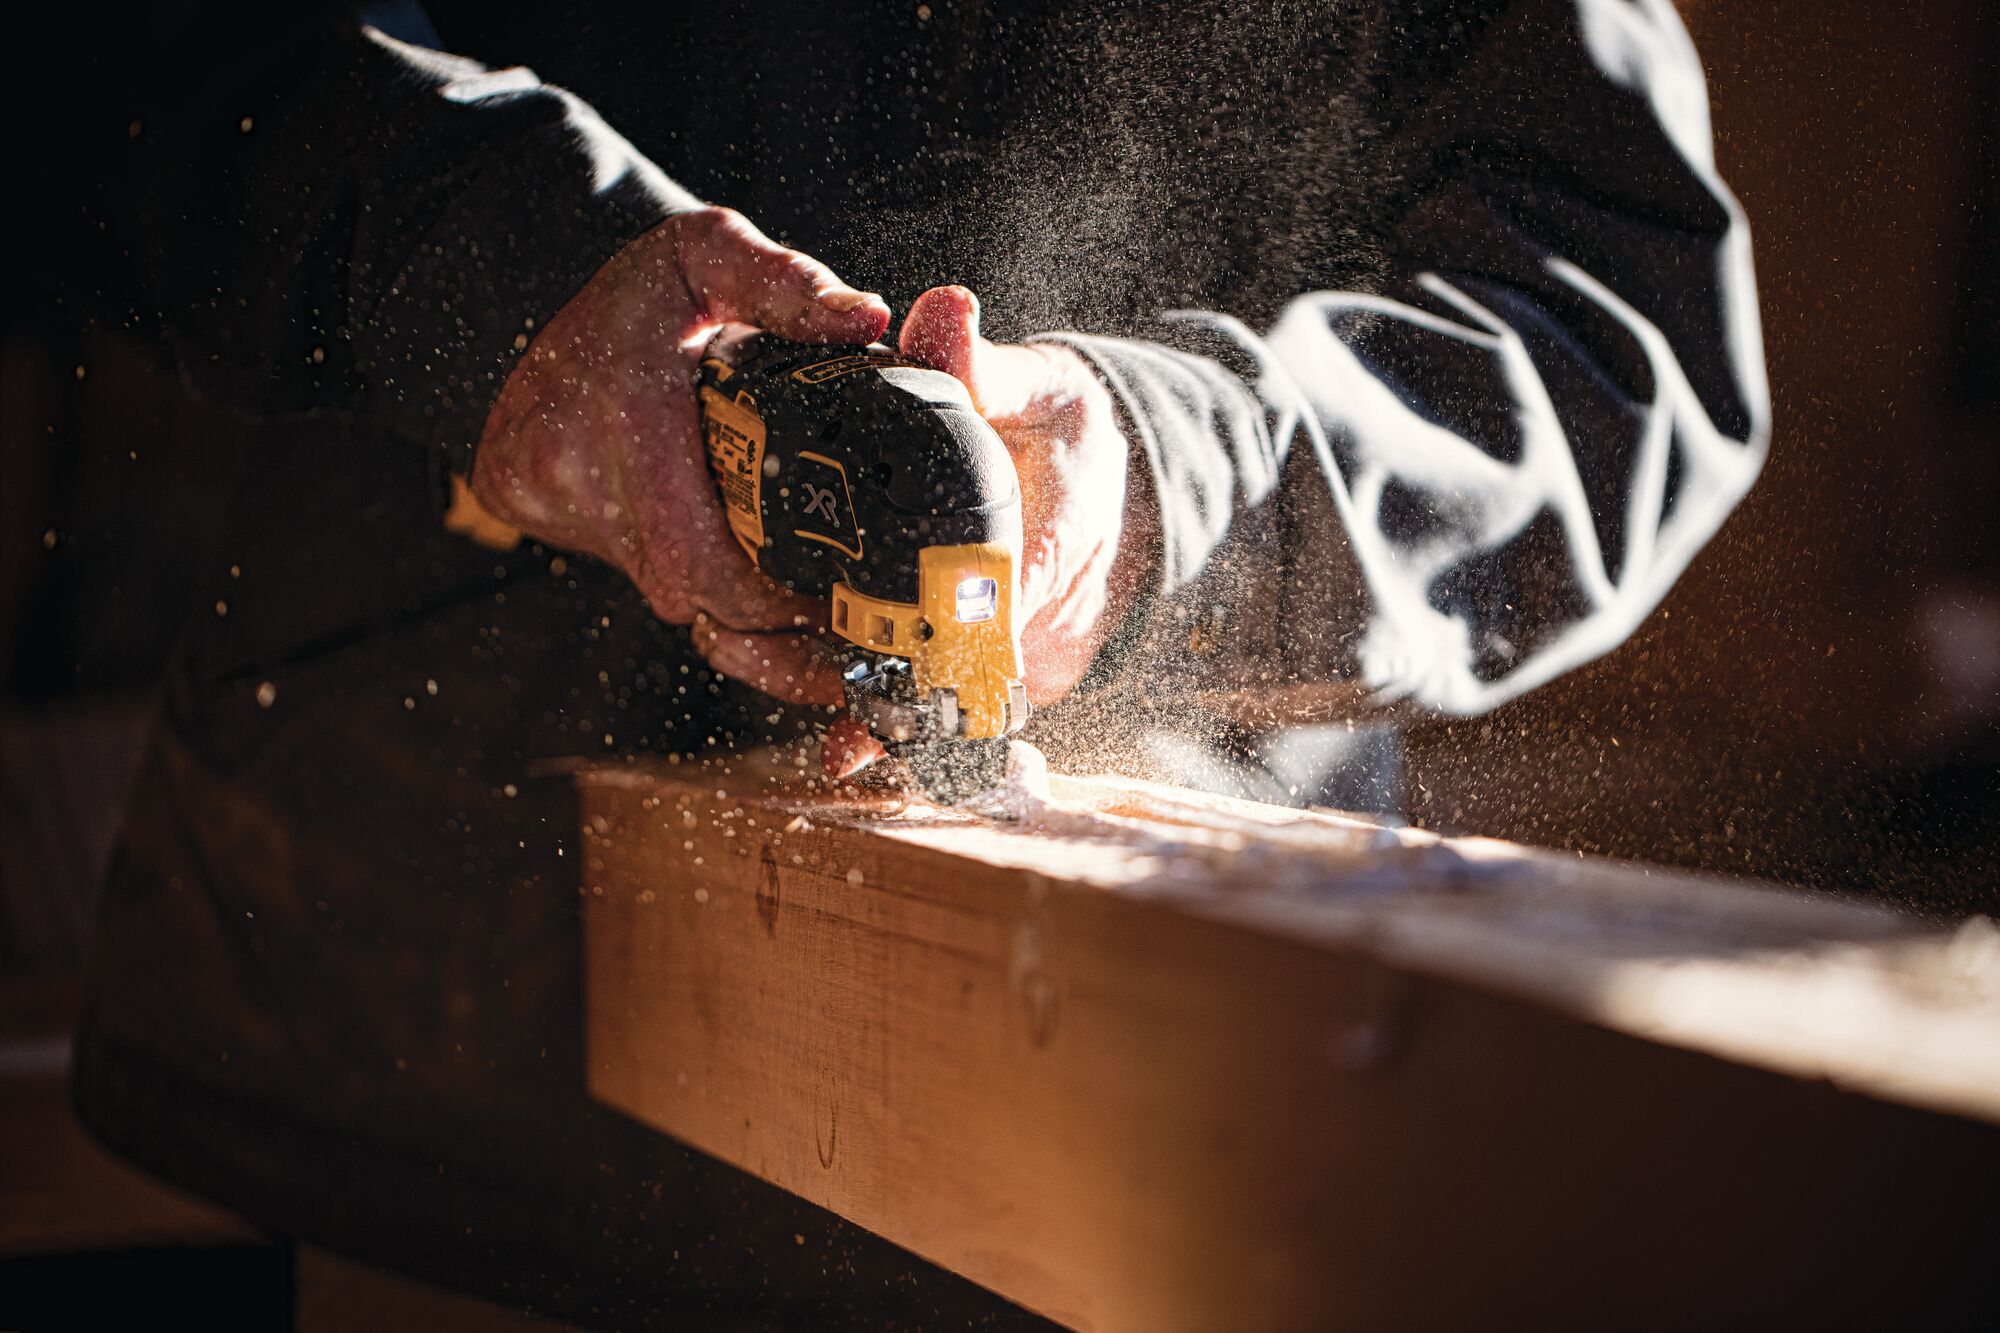 XR Cordless Oscillating Multi Tool being used by worker to slice through a square wooden log